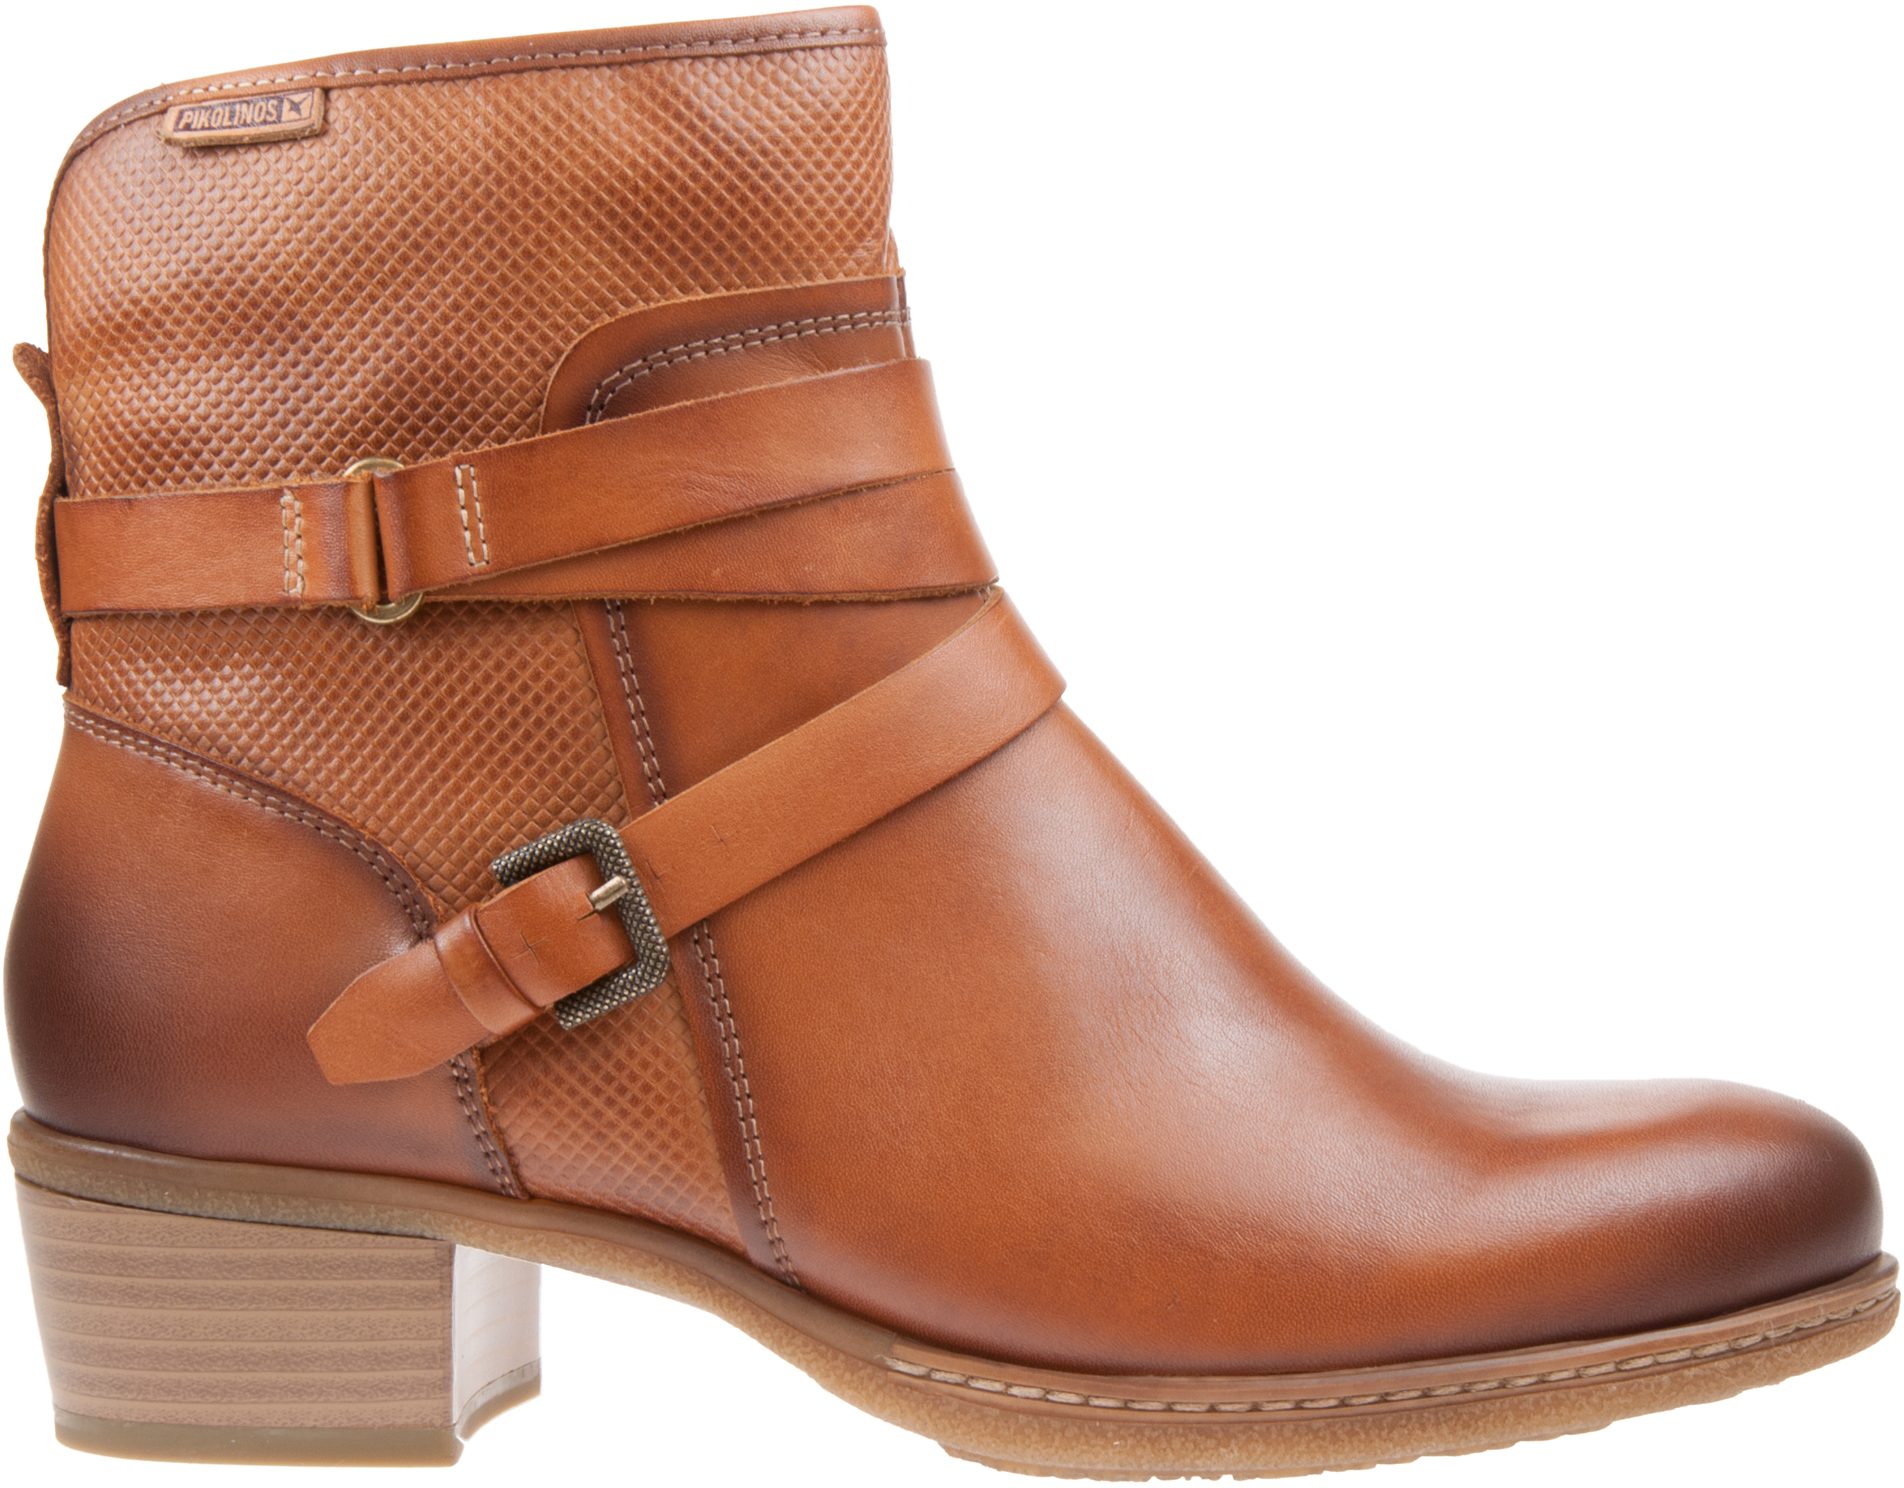 Pikolinos Zaragoza Brandy 8907 - Ankle Boots - Humphries Shoes